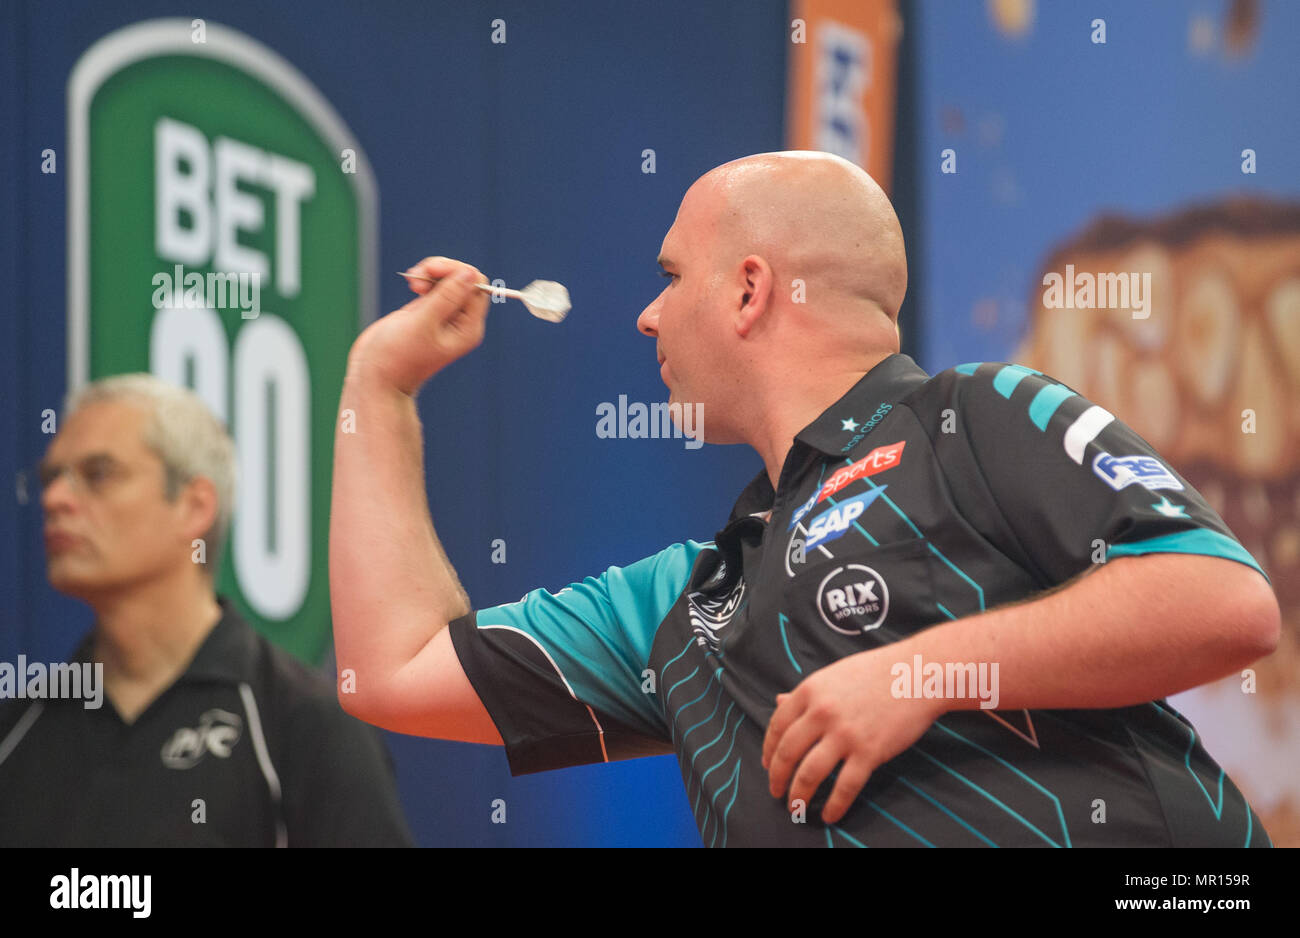 25 May 2018, Germany, Gelsenkirchen Rob Cross of England in action during the German Darts Masters in the PDC World Series of Darts